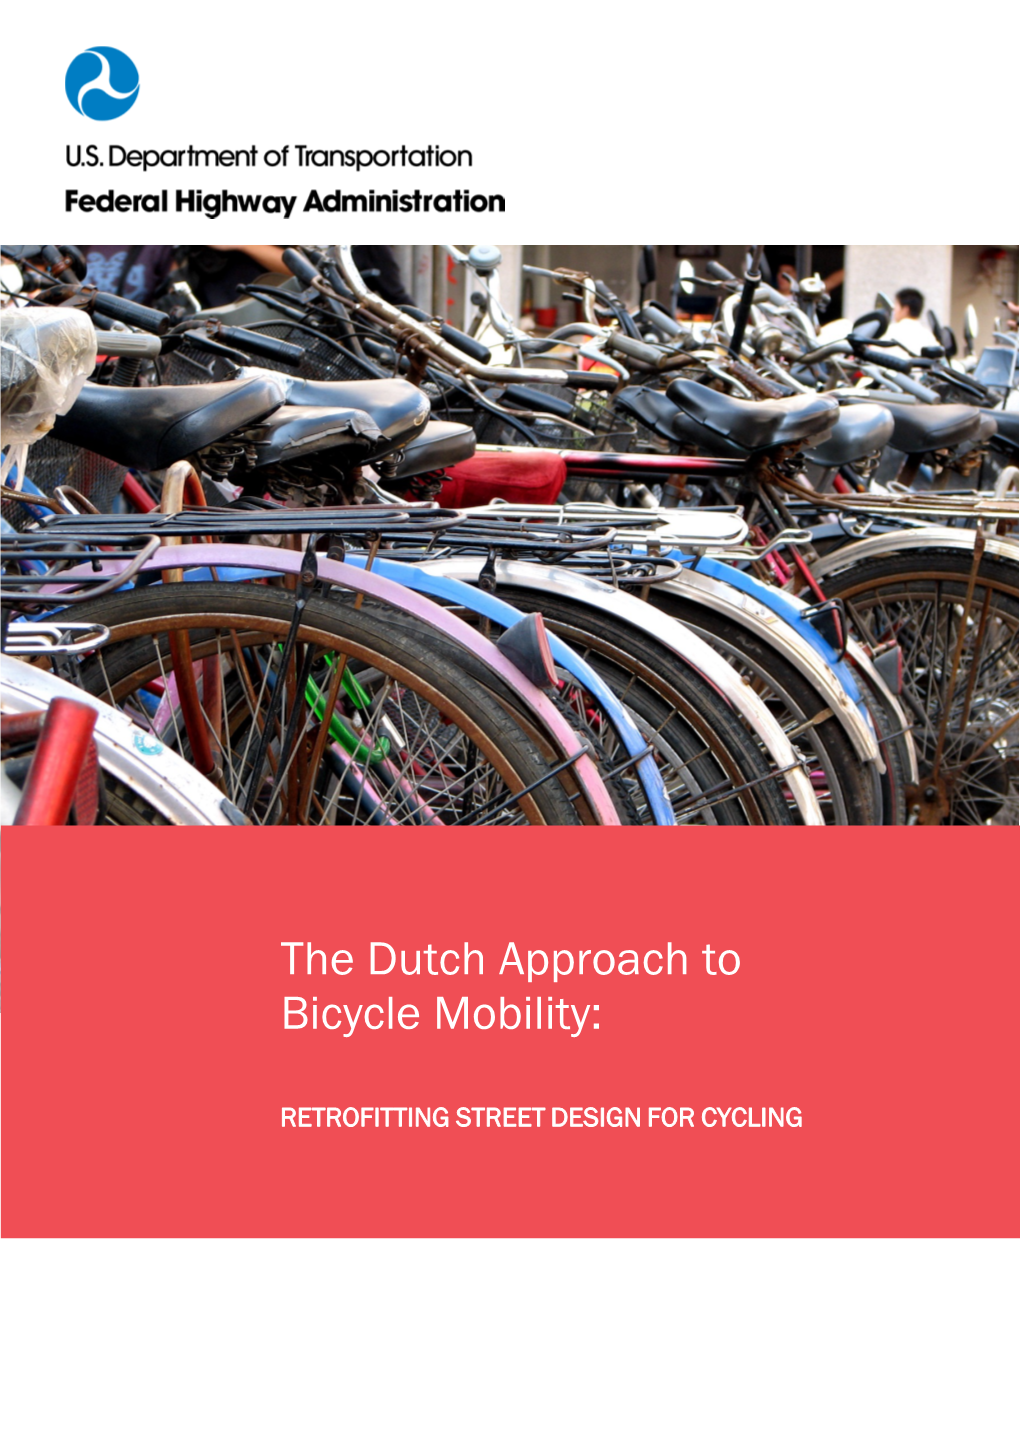 The Dutch Approach to Bicycle Mobility